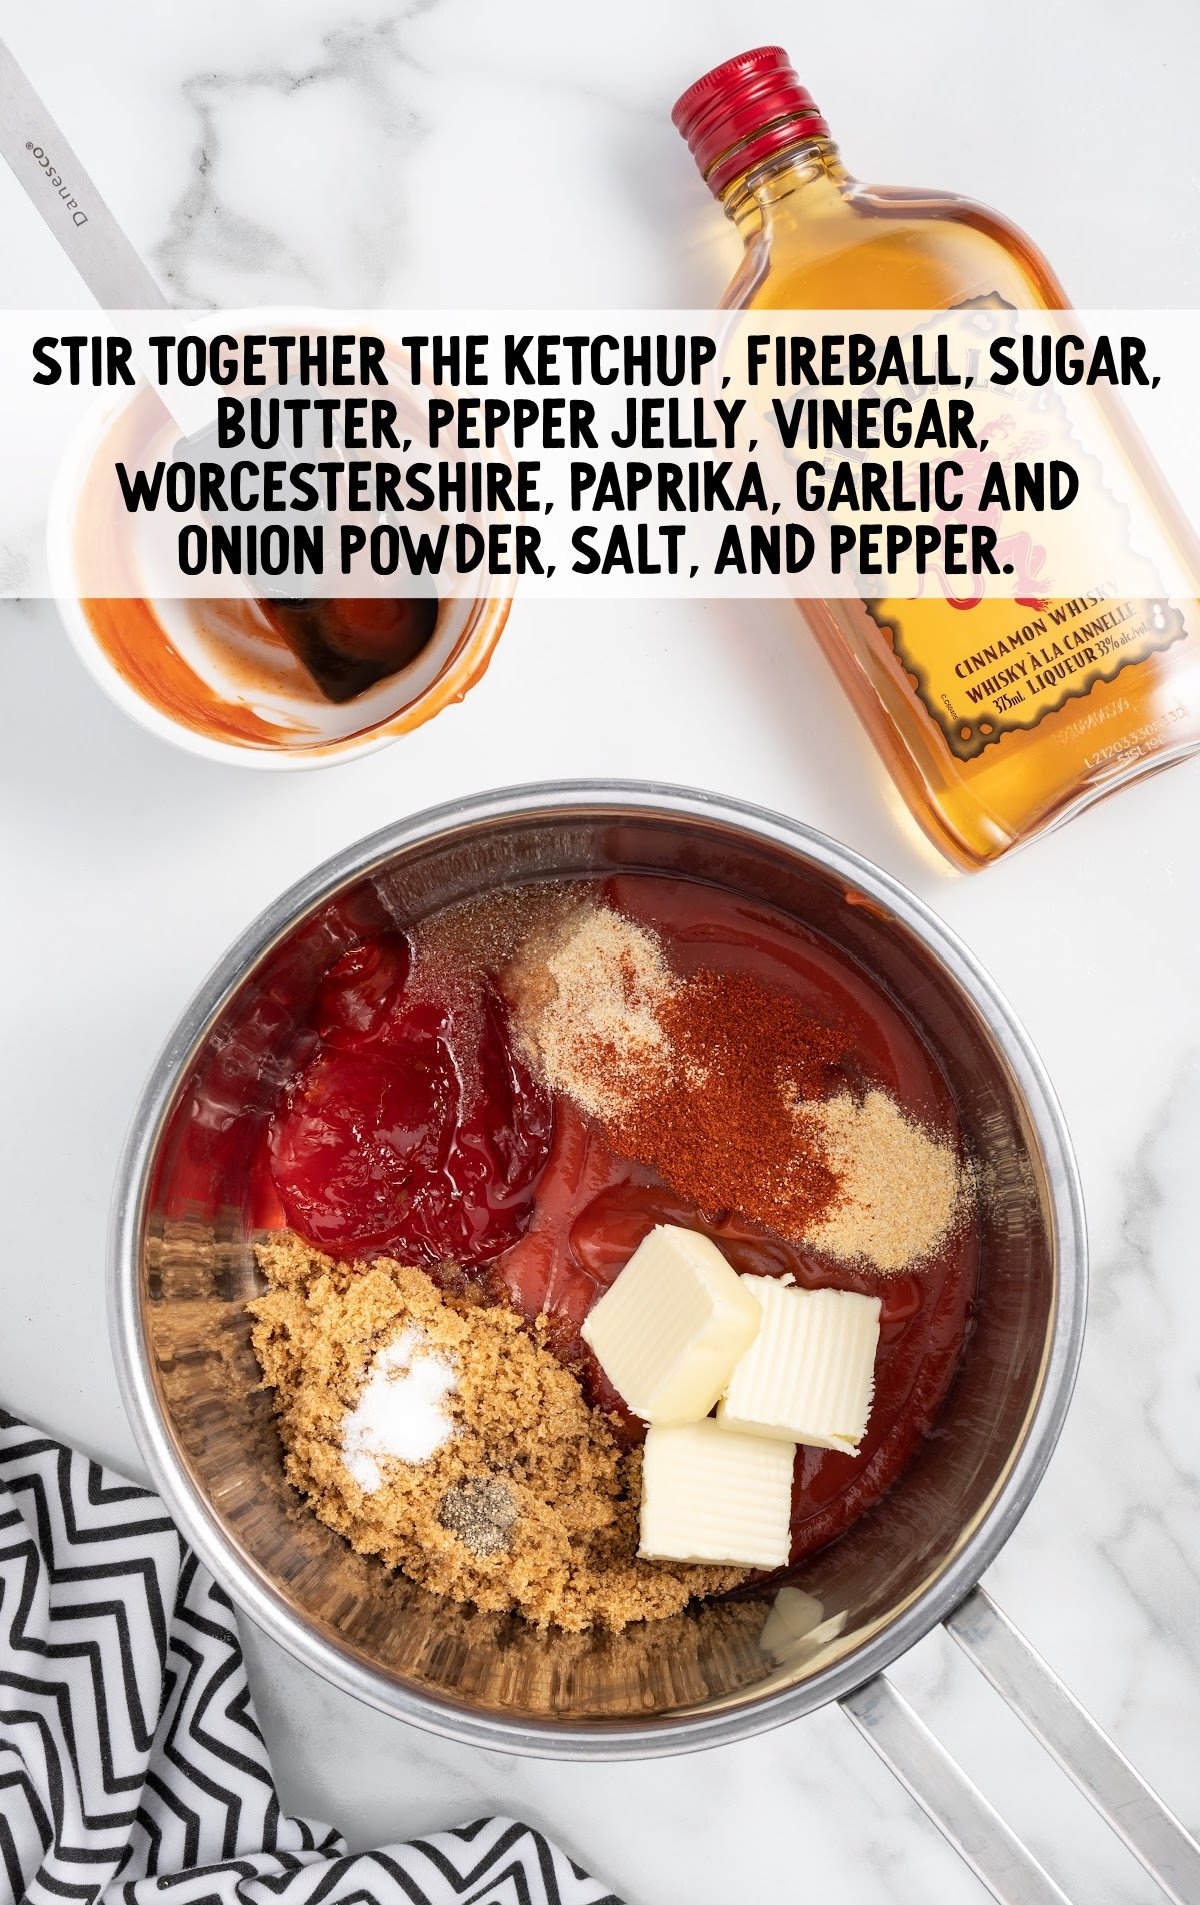 ketchup, fireball, sugar, butter, pepper jelly, vinegar, worcestershire, paprika, garlic and onion powder, salt, and pepper stirred together